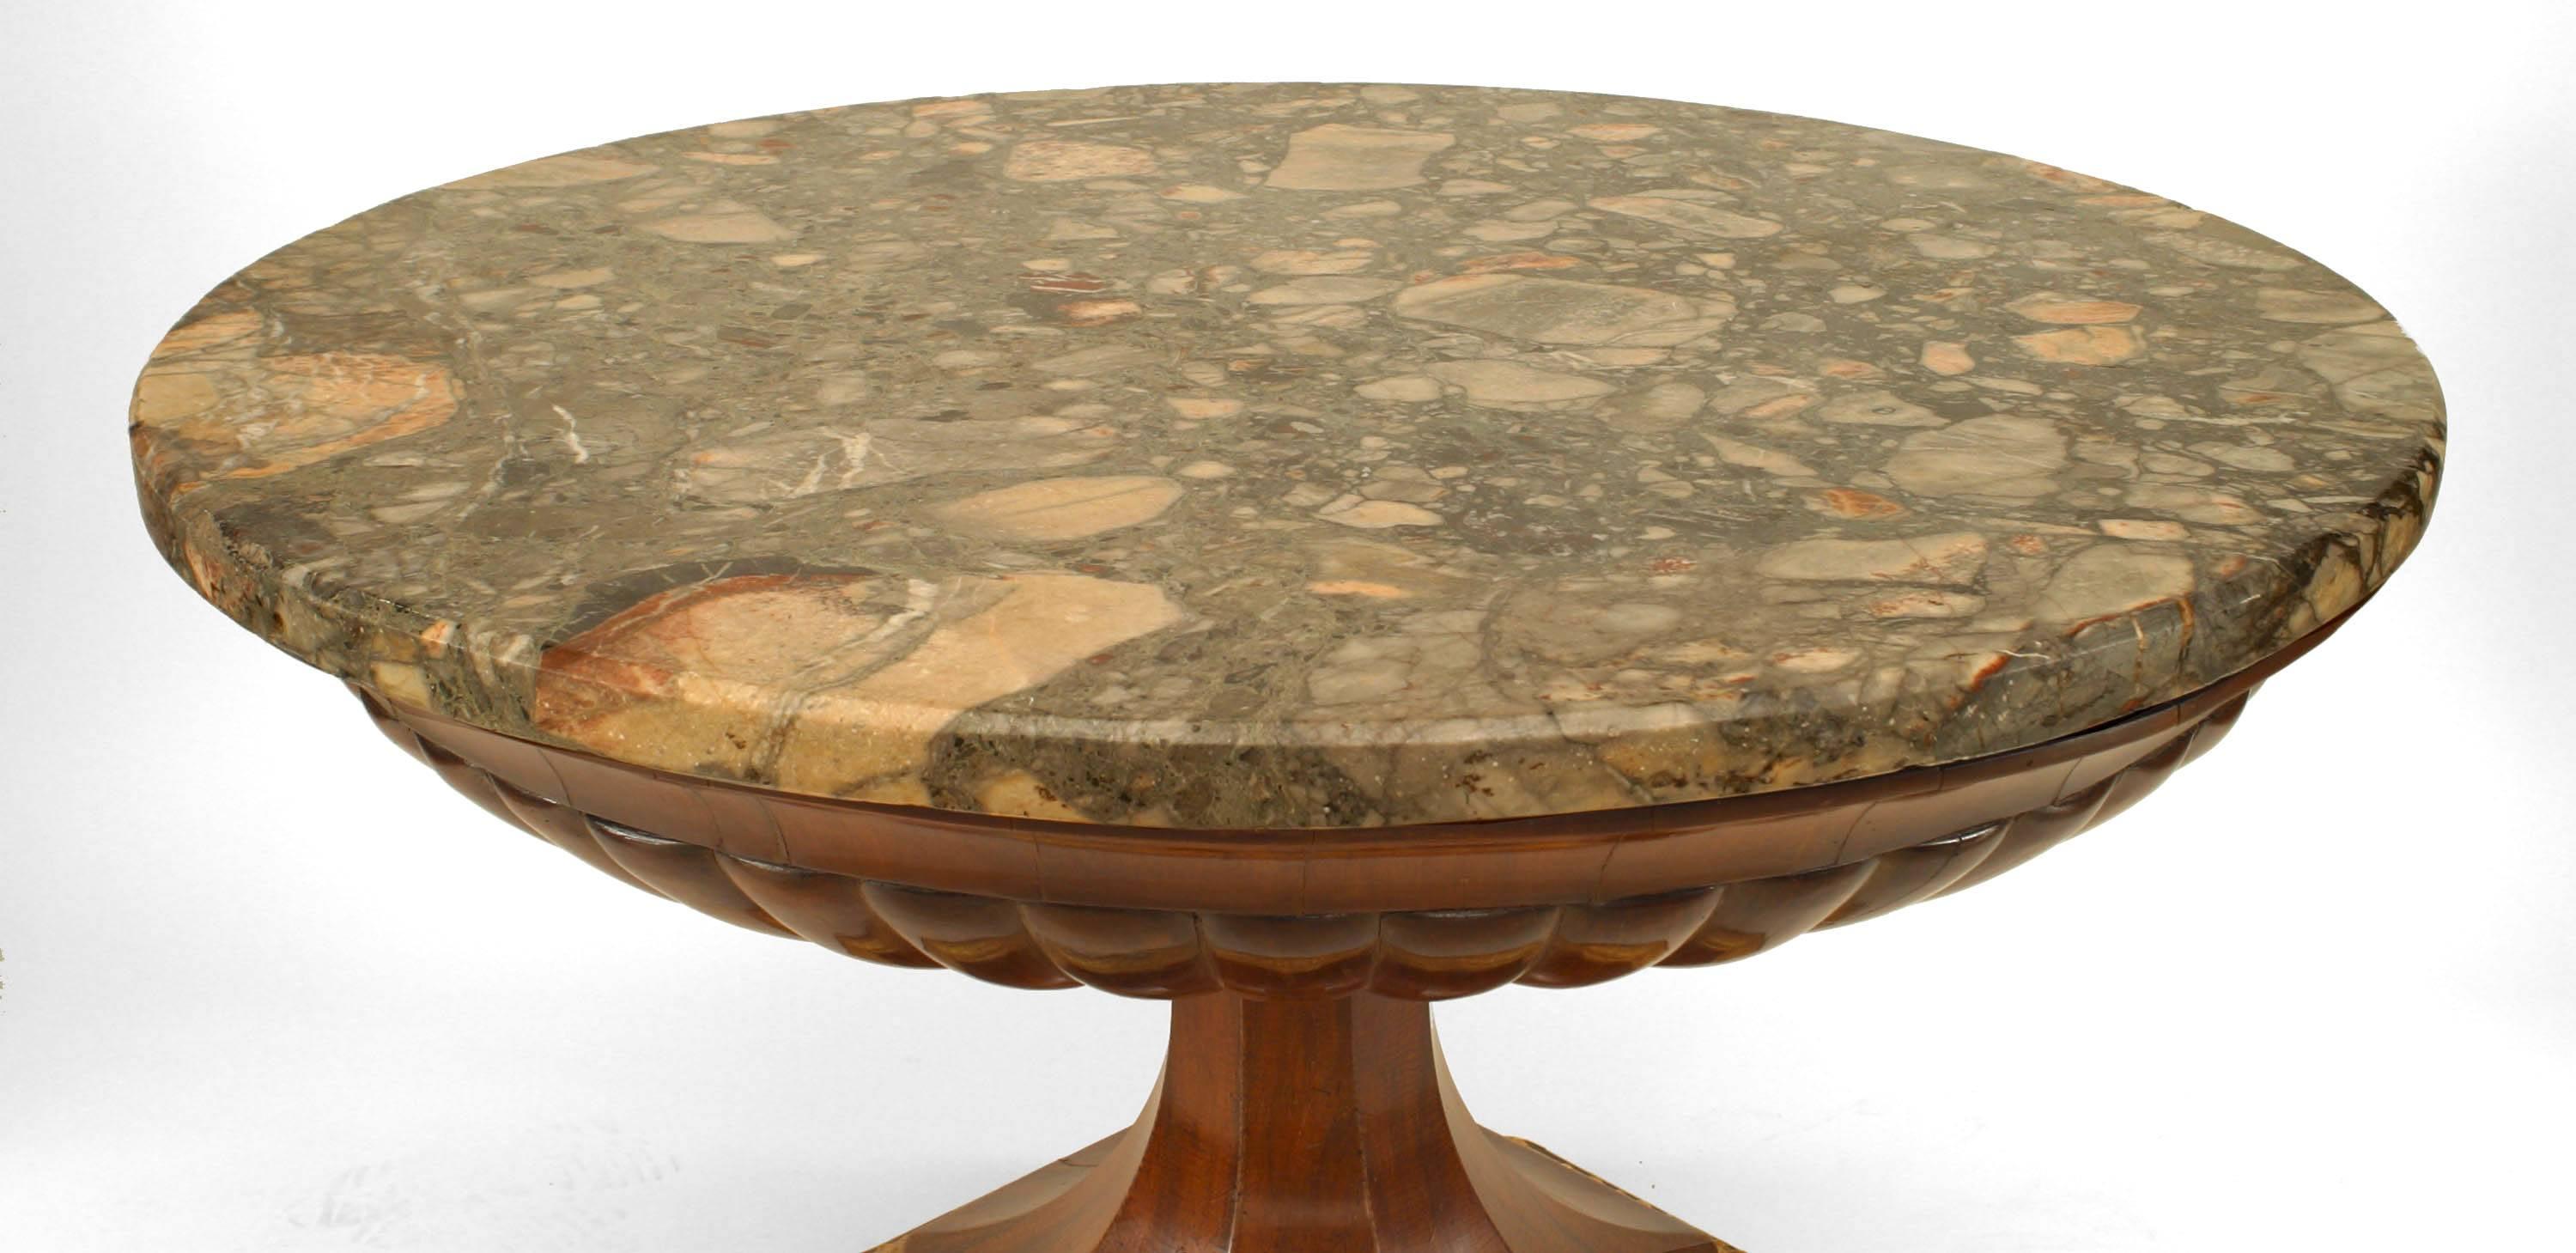 Neoclassical Italian Neapolitan Neo-Classic Walnut Center Table with Marble Top For Sale